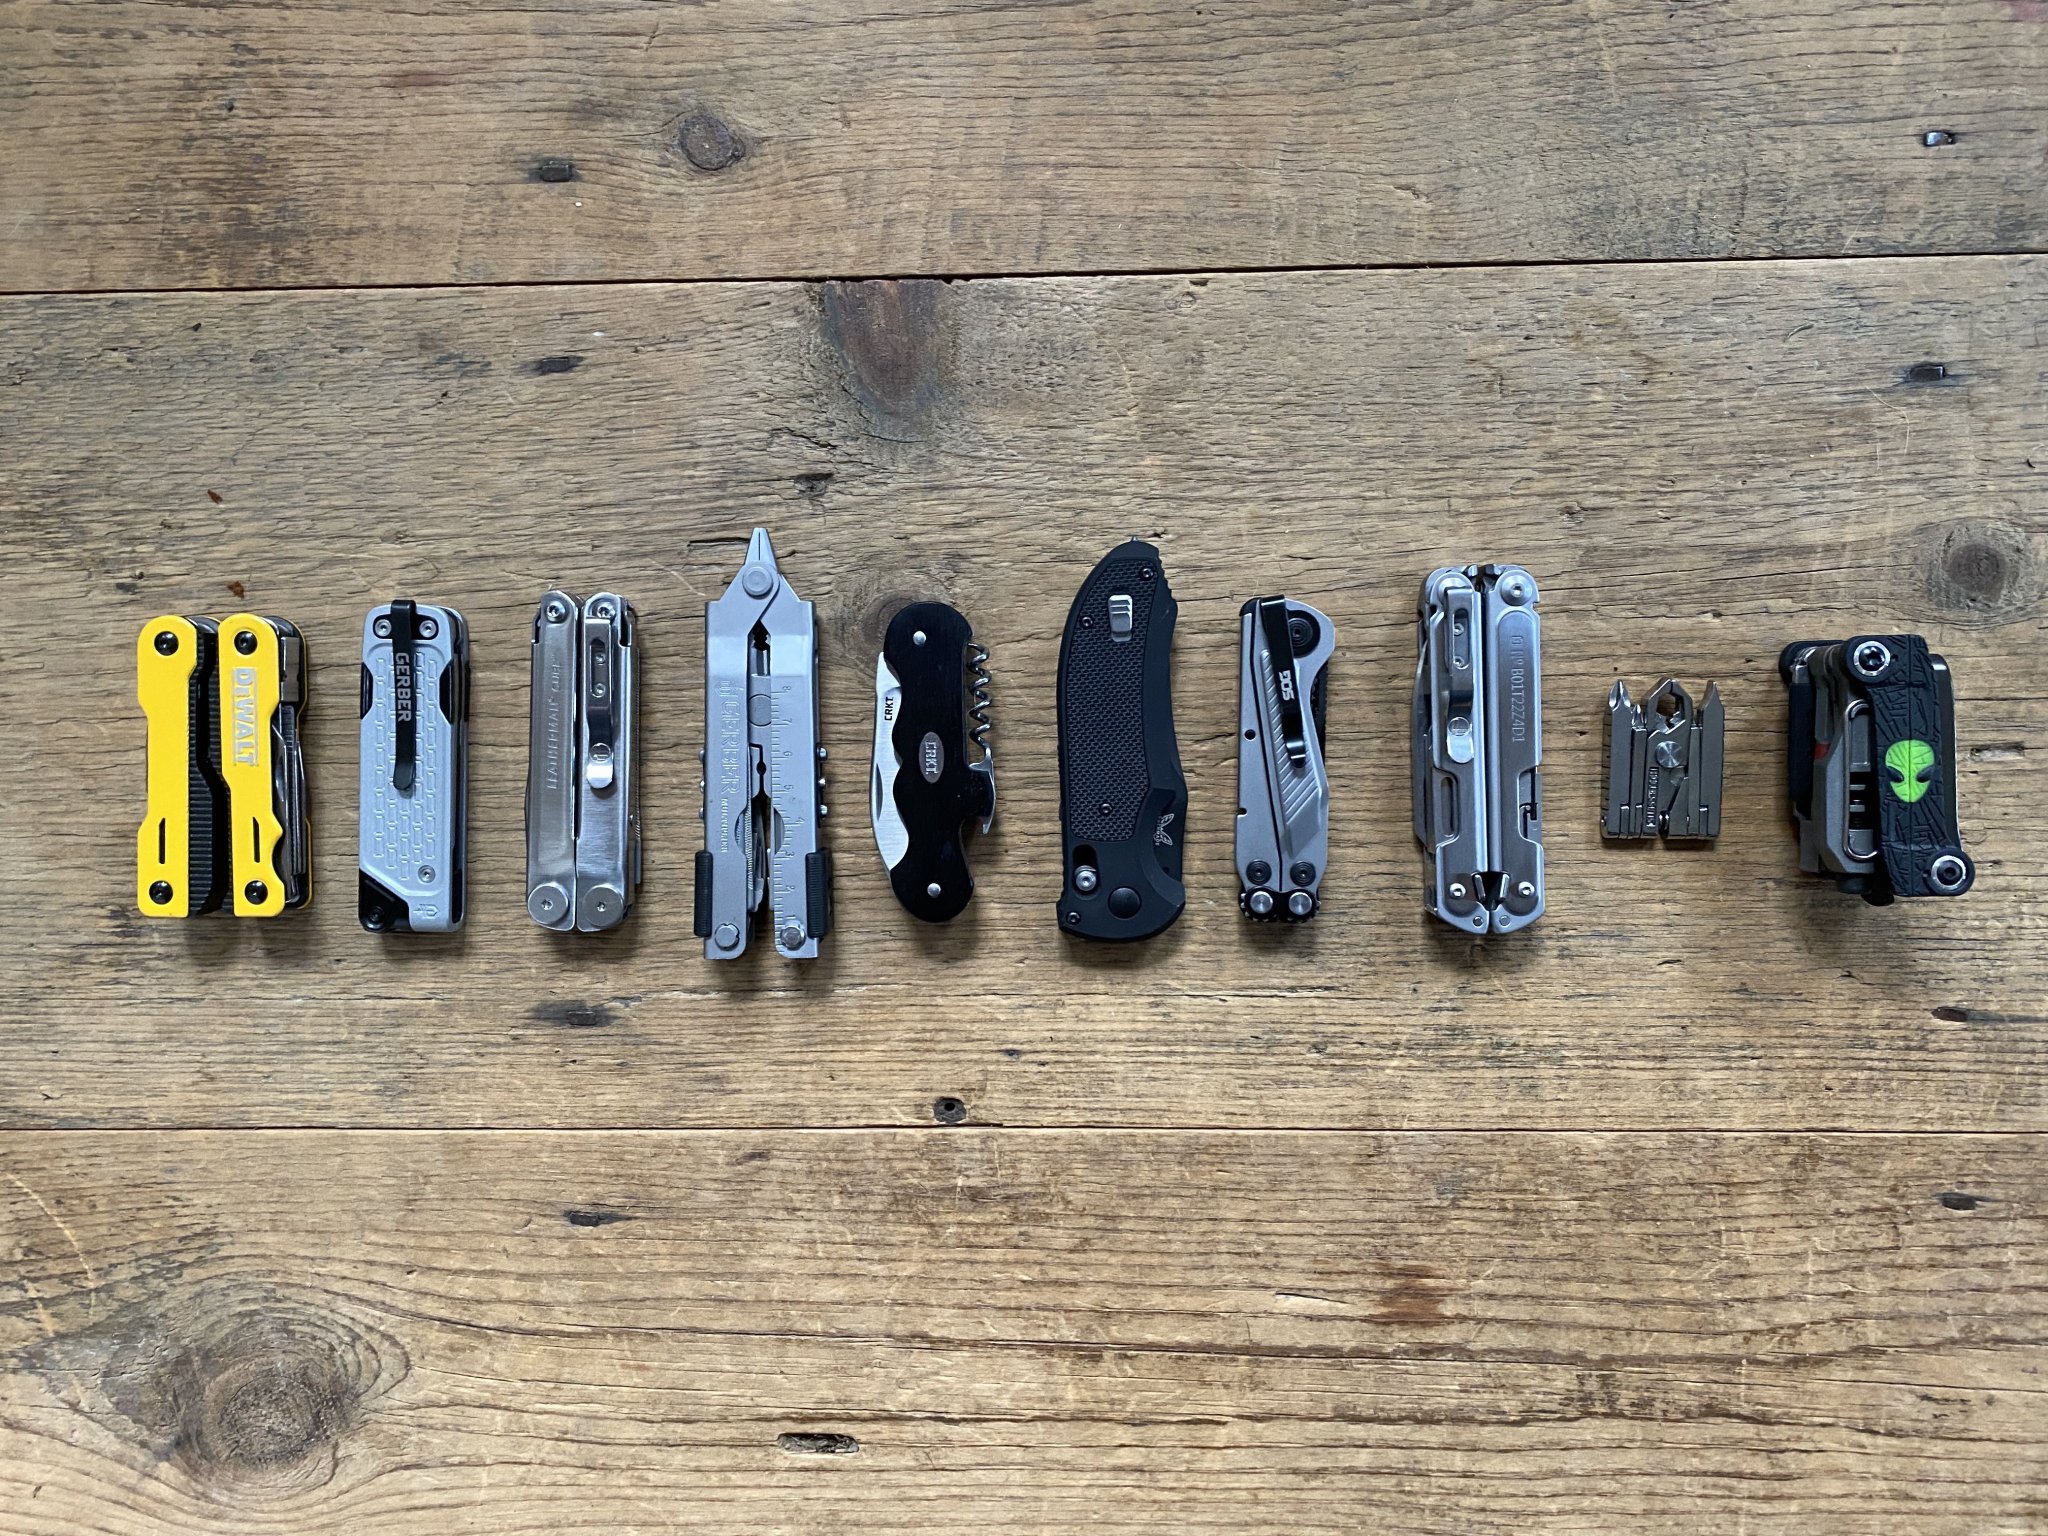 We Tested the Best Multitools to Have on Hand